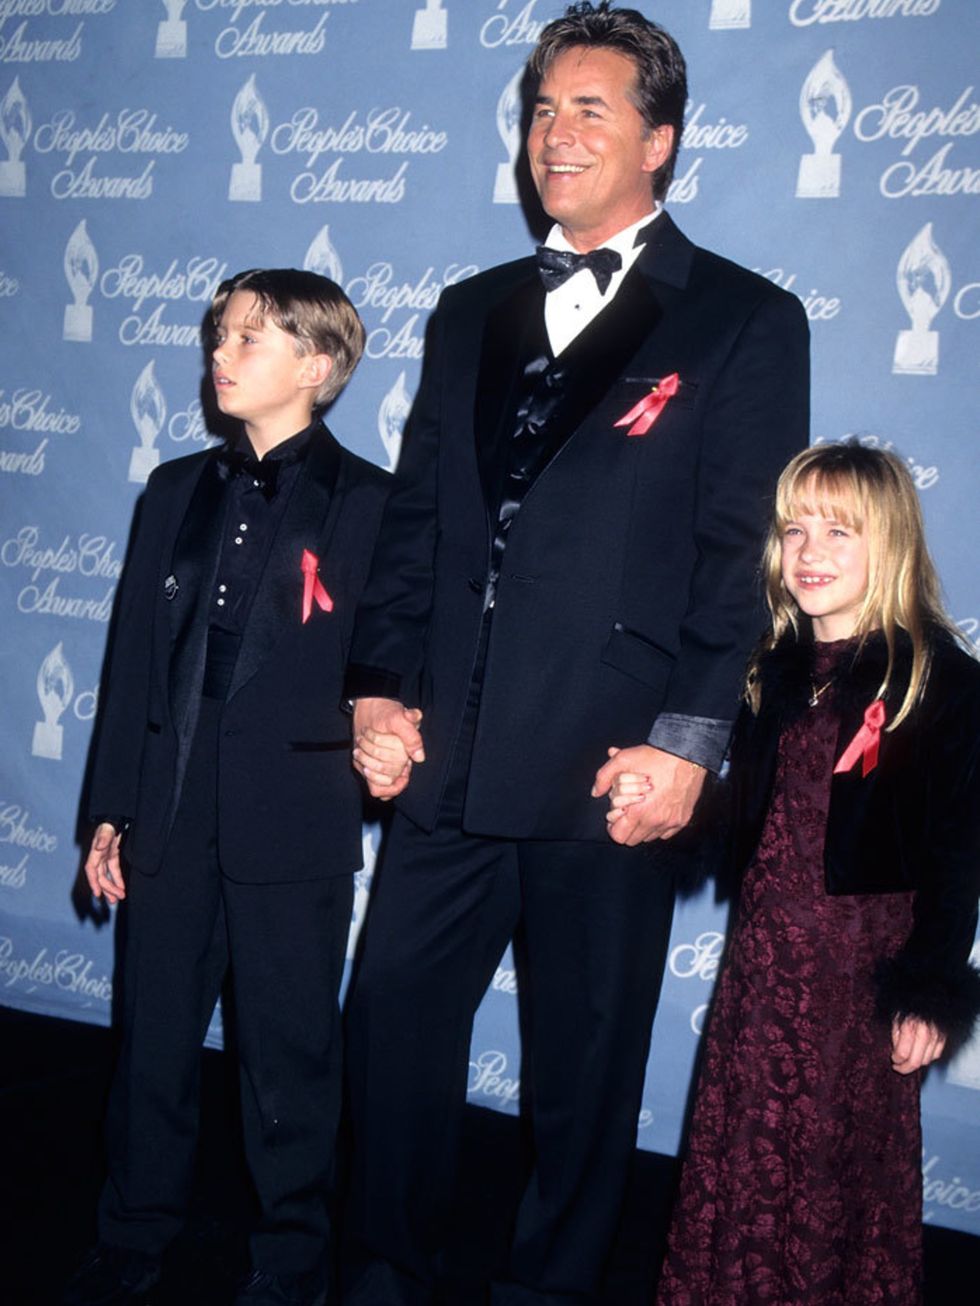 Dakota Johnson, 7, with her father Don Johnson

At the 1997 Peoples Choice Awards.